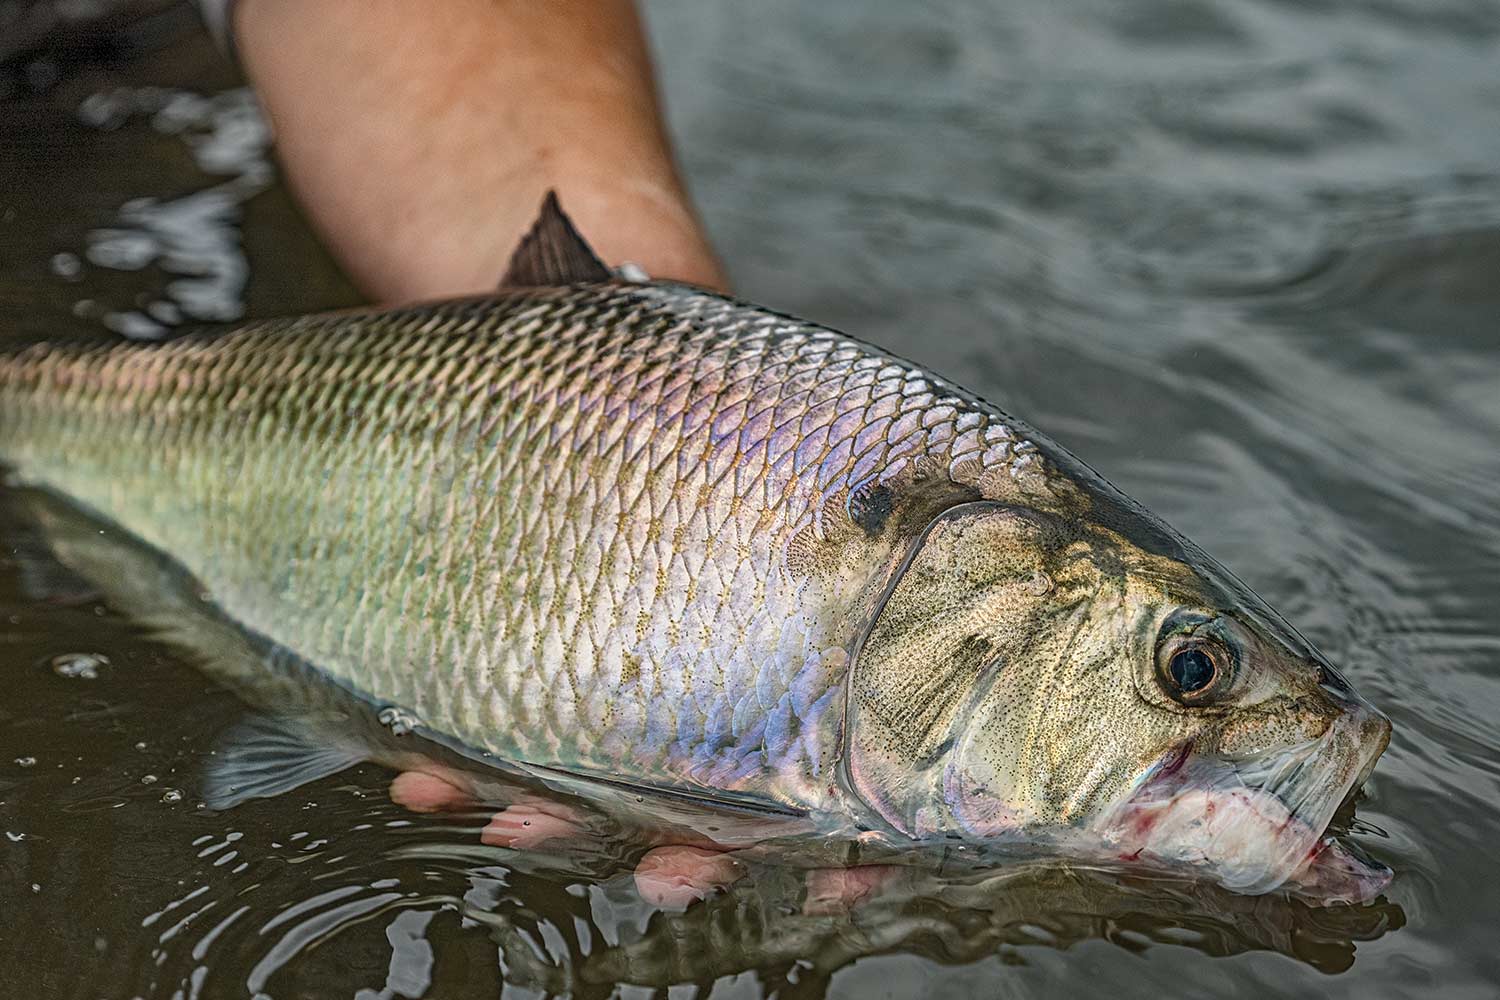 An American shad fish in the water.